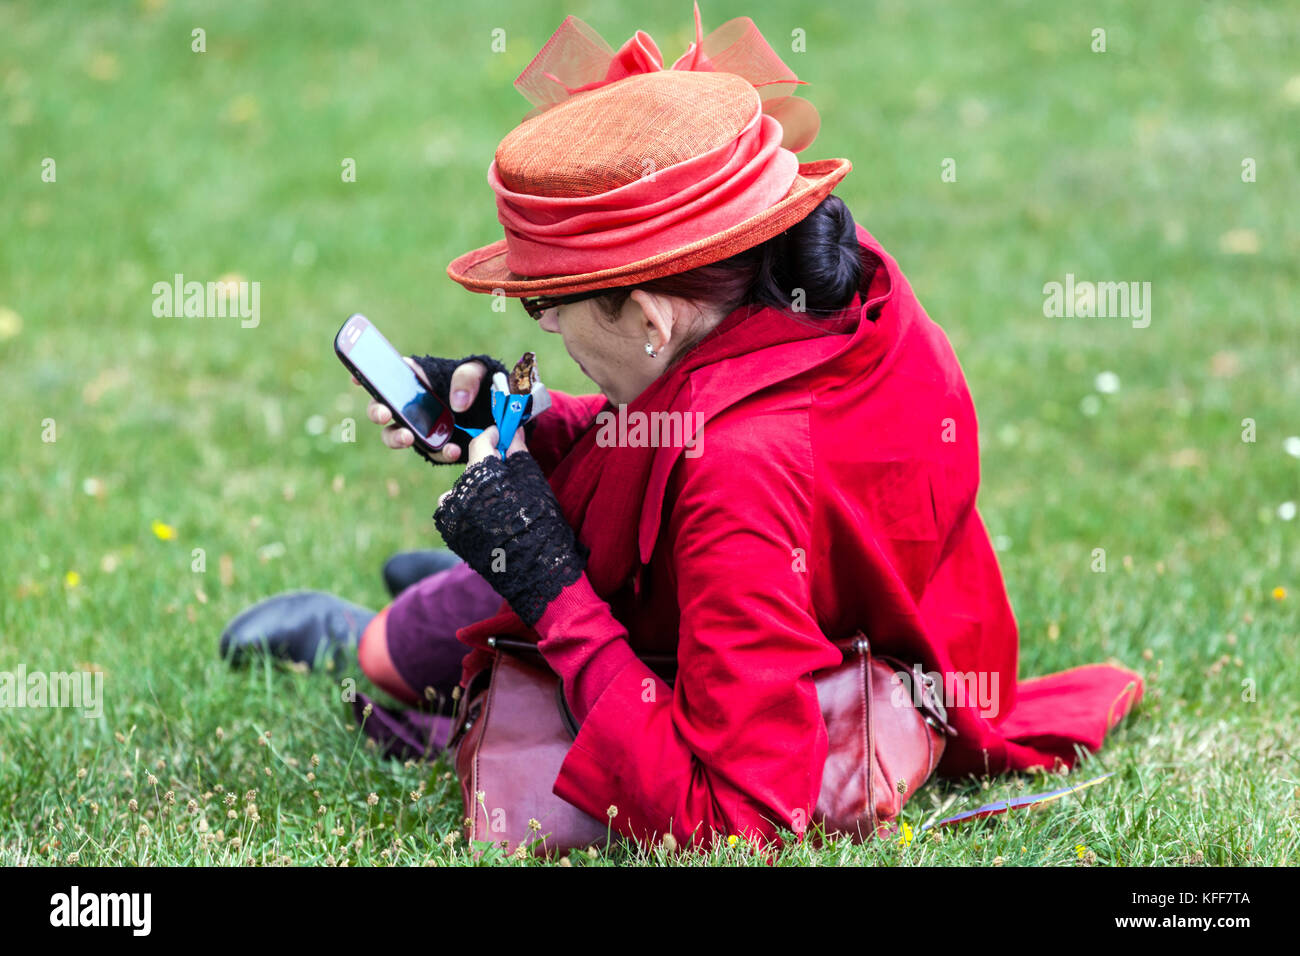 The senior woman dressed in red, uses her mobile phone, rear view Stock Photo